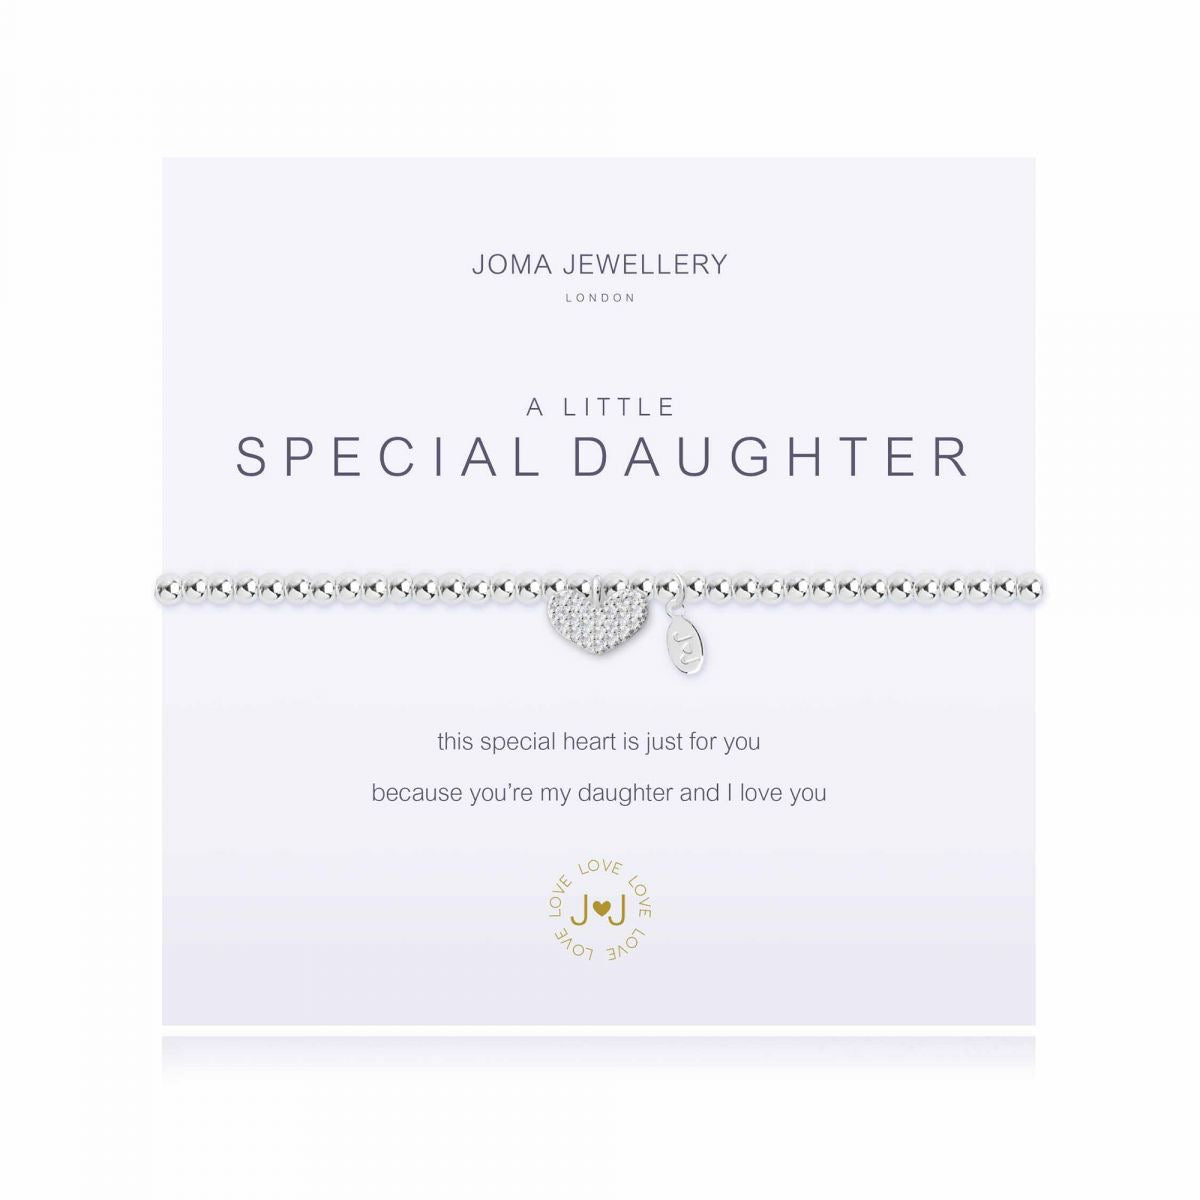 Joma Jewellery 'A Little' Just For You Daughter